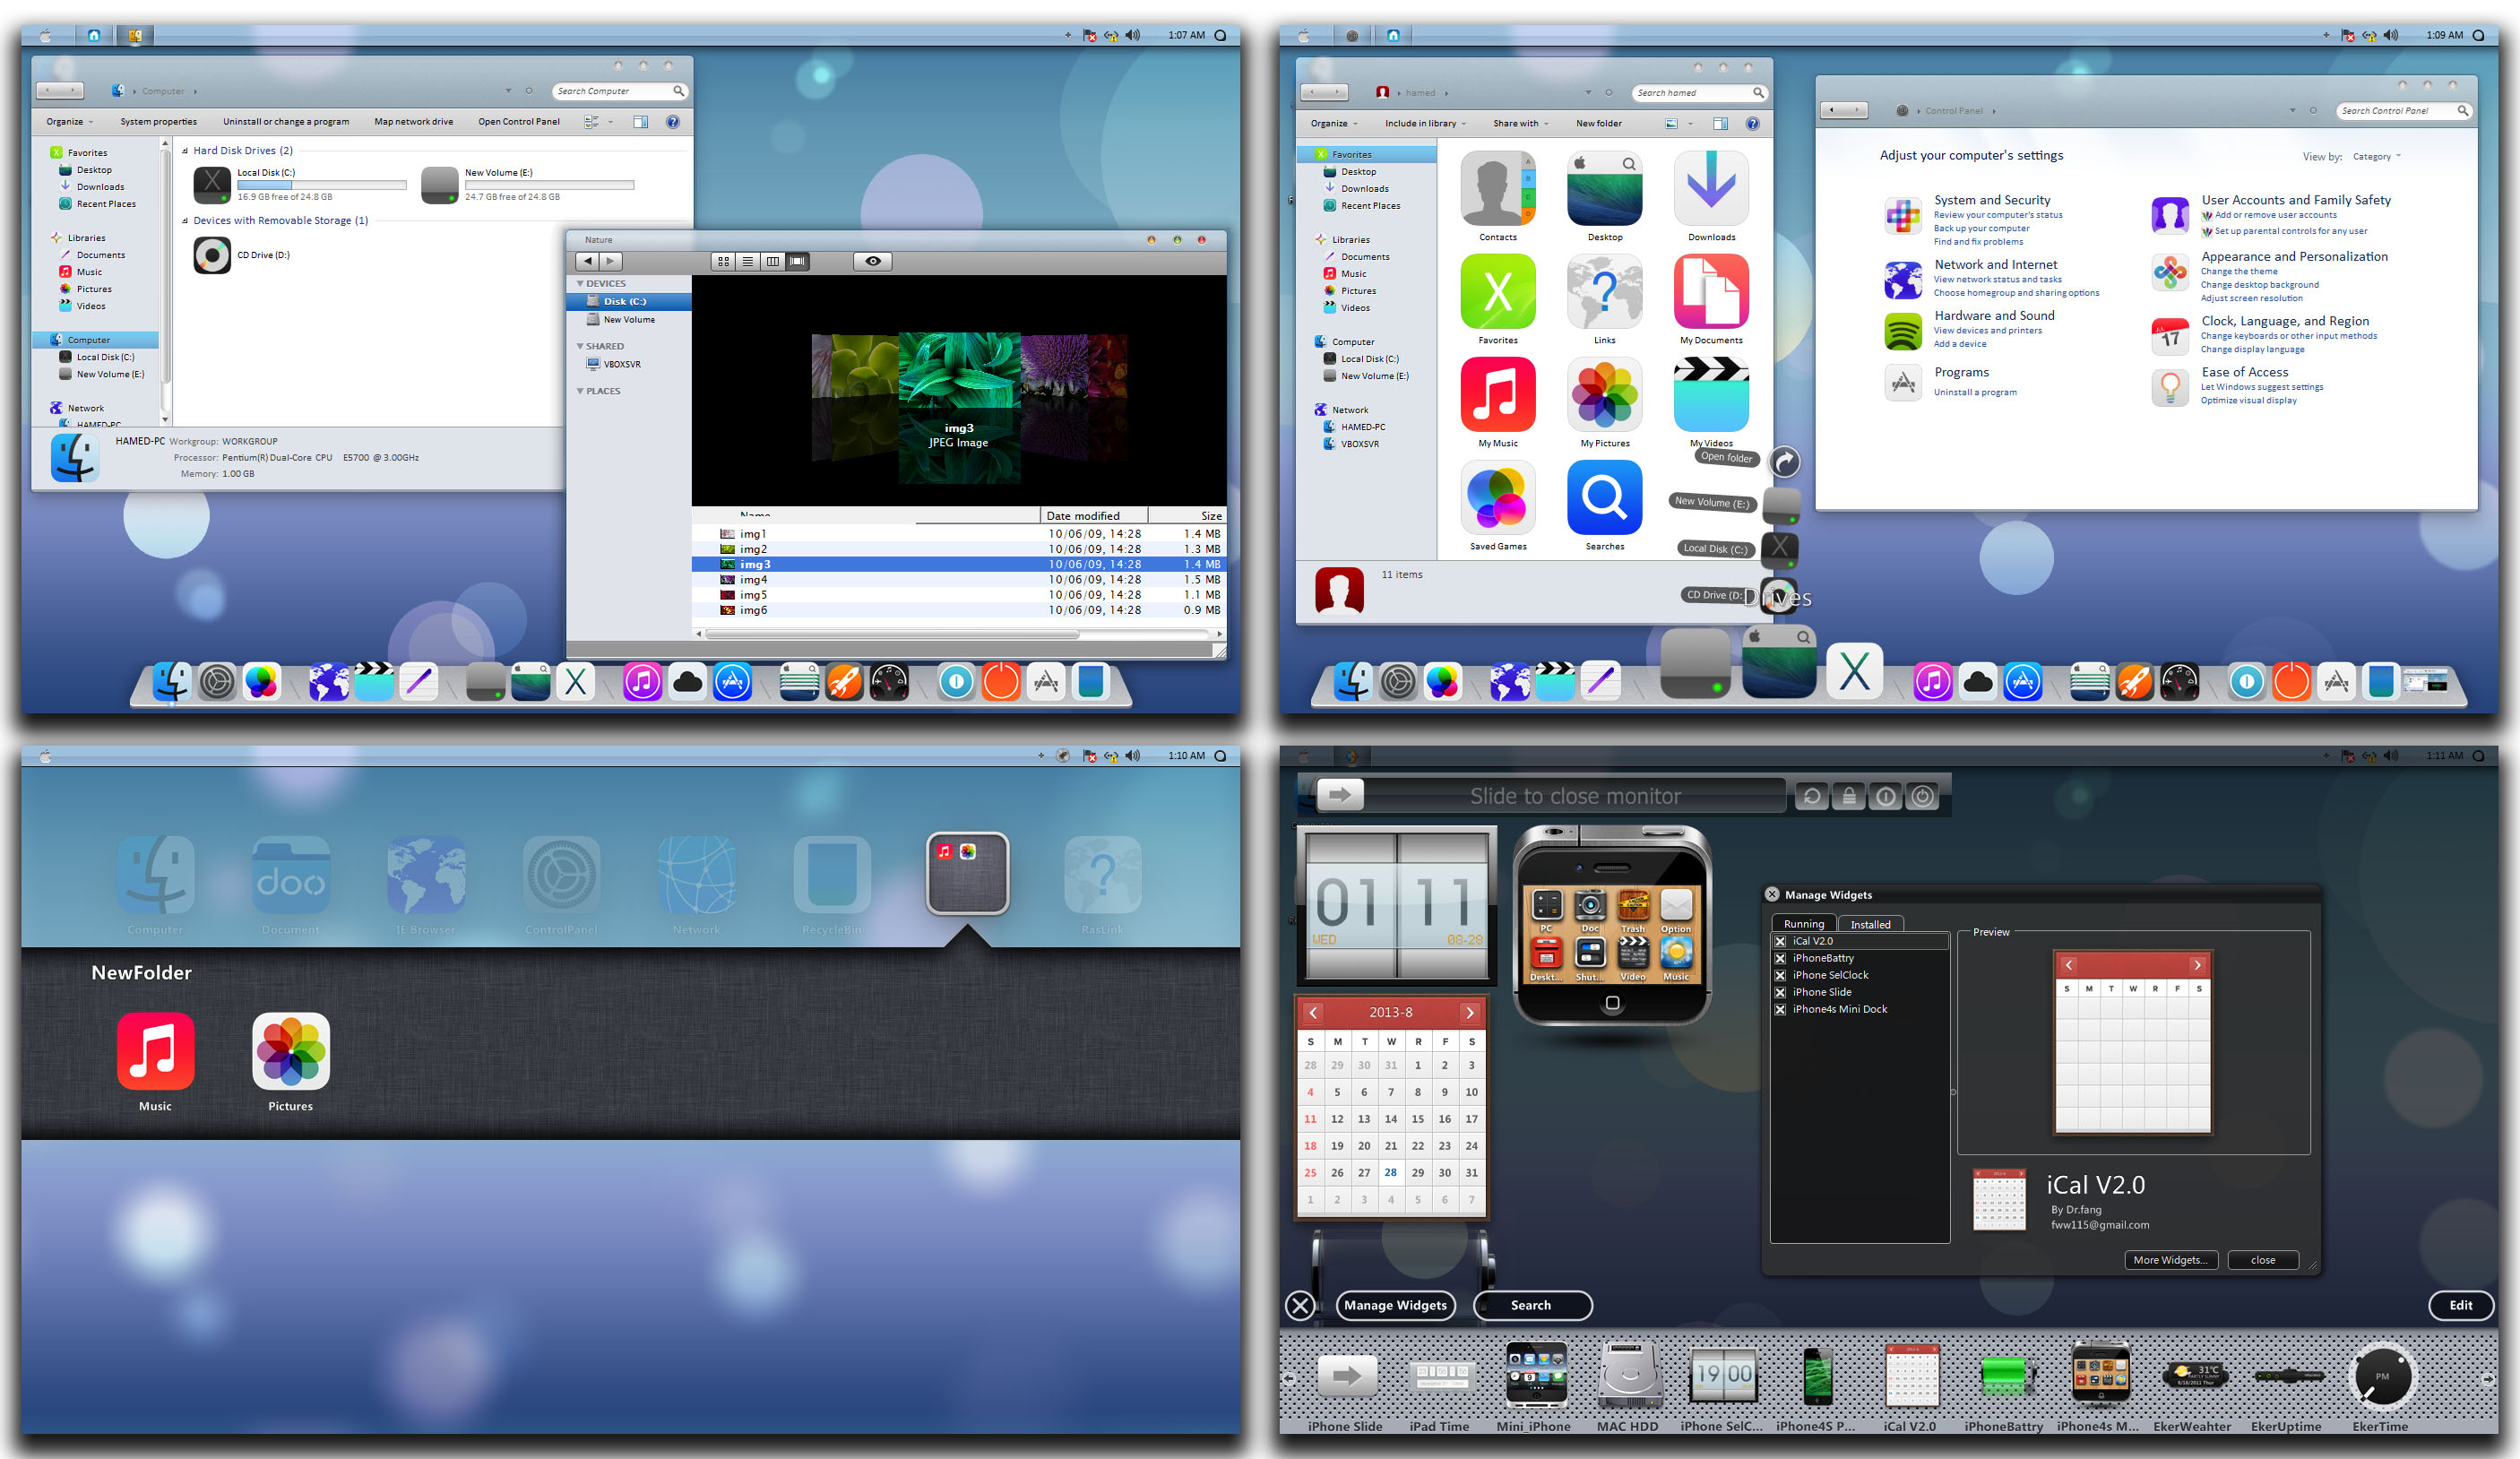 iOS7 SkinPack for Win8.1 and 7 released